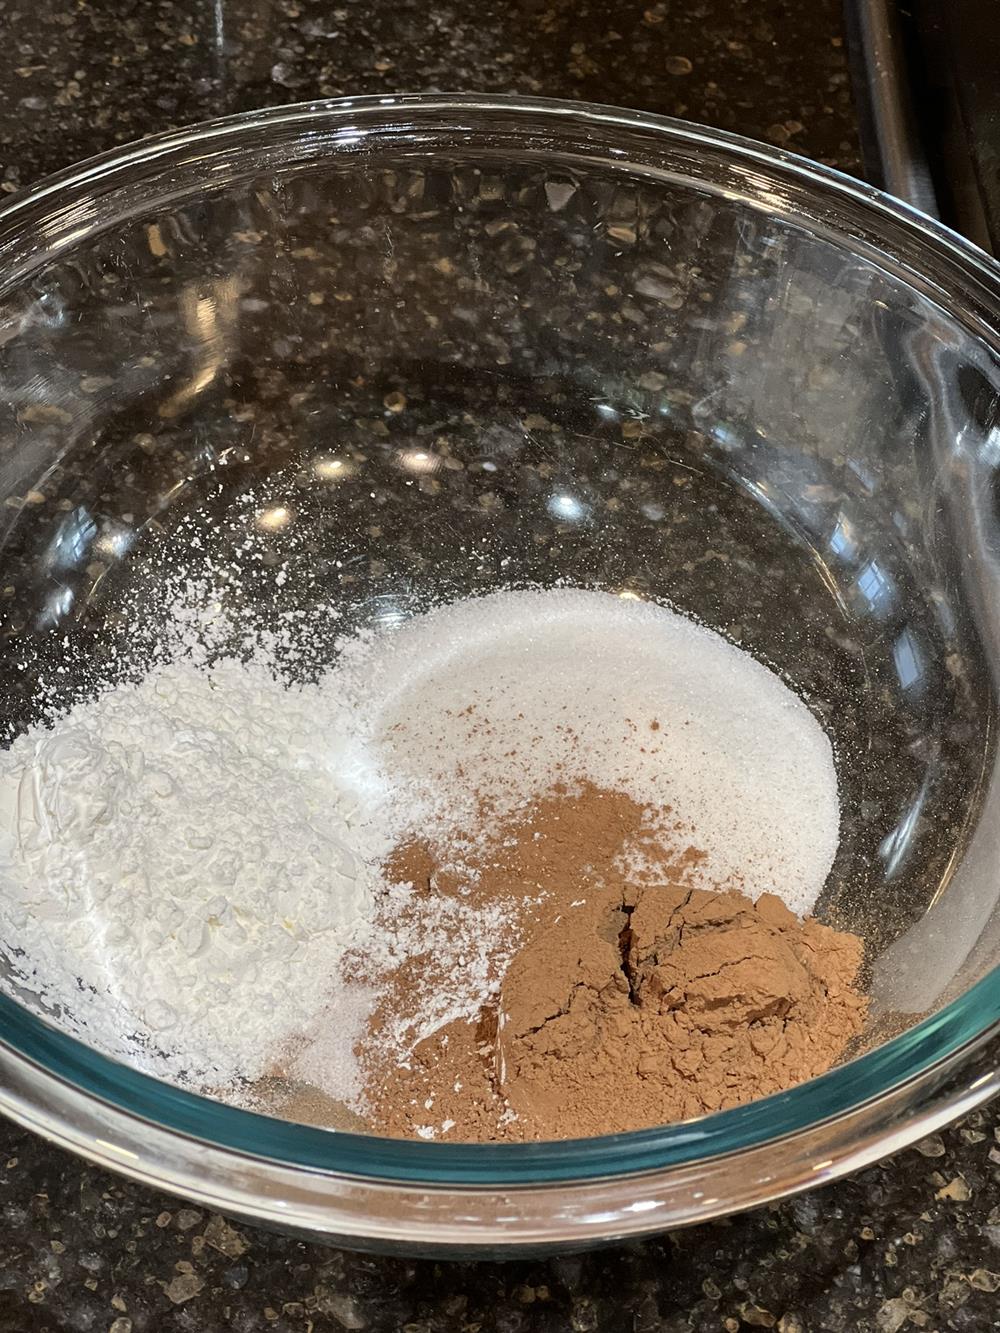 Chocolate pudding ingredients in glass bowl